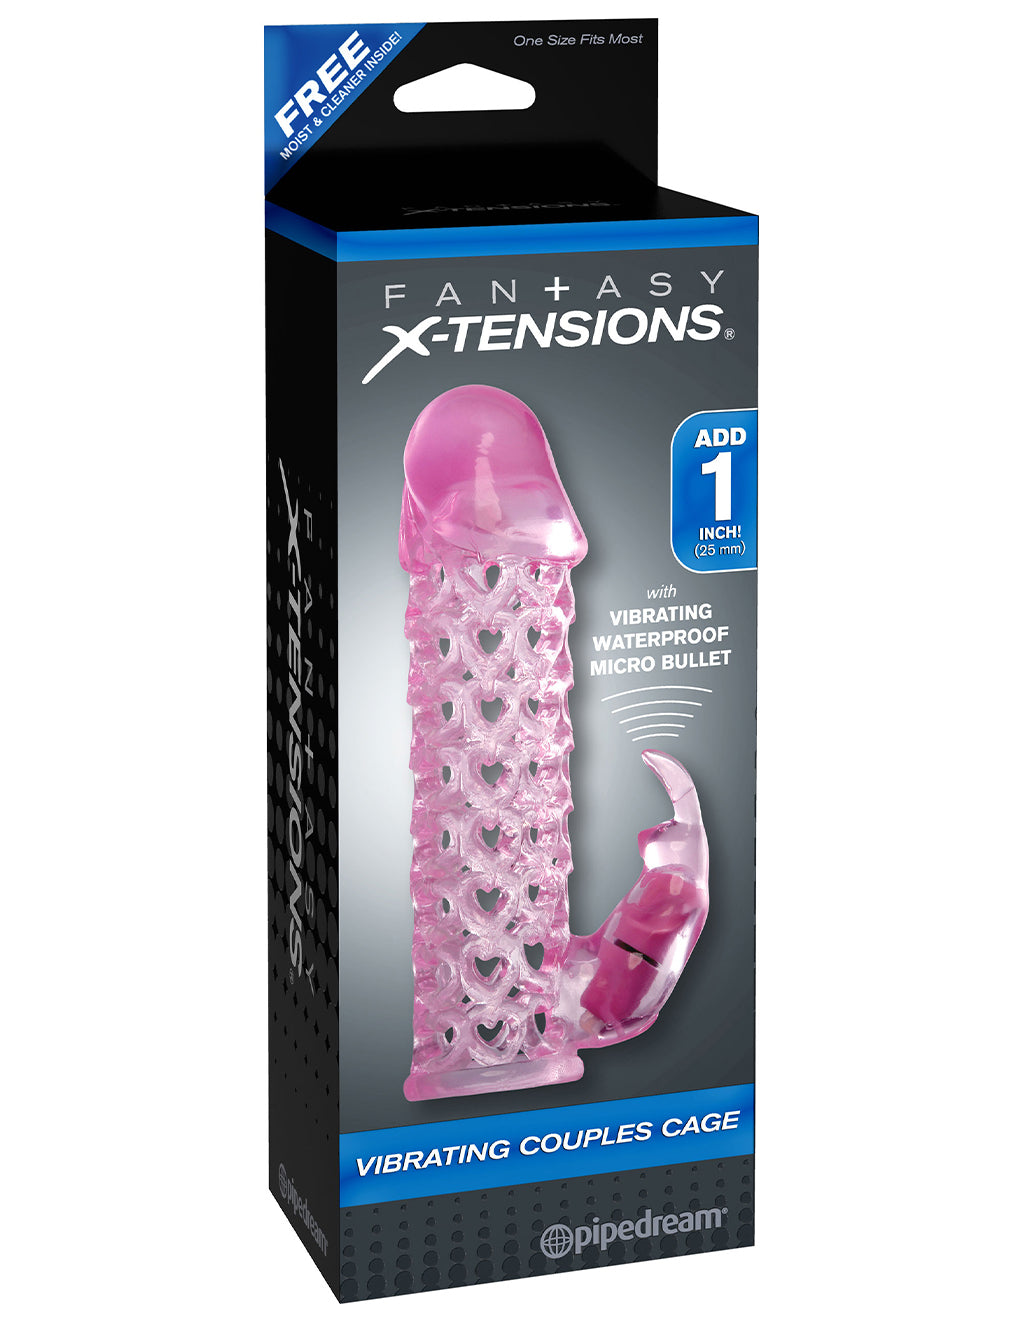 Fantasy Xtensions Vibrating Couples Cage- box